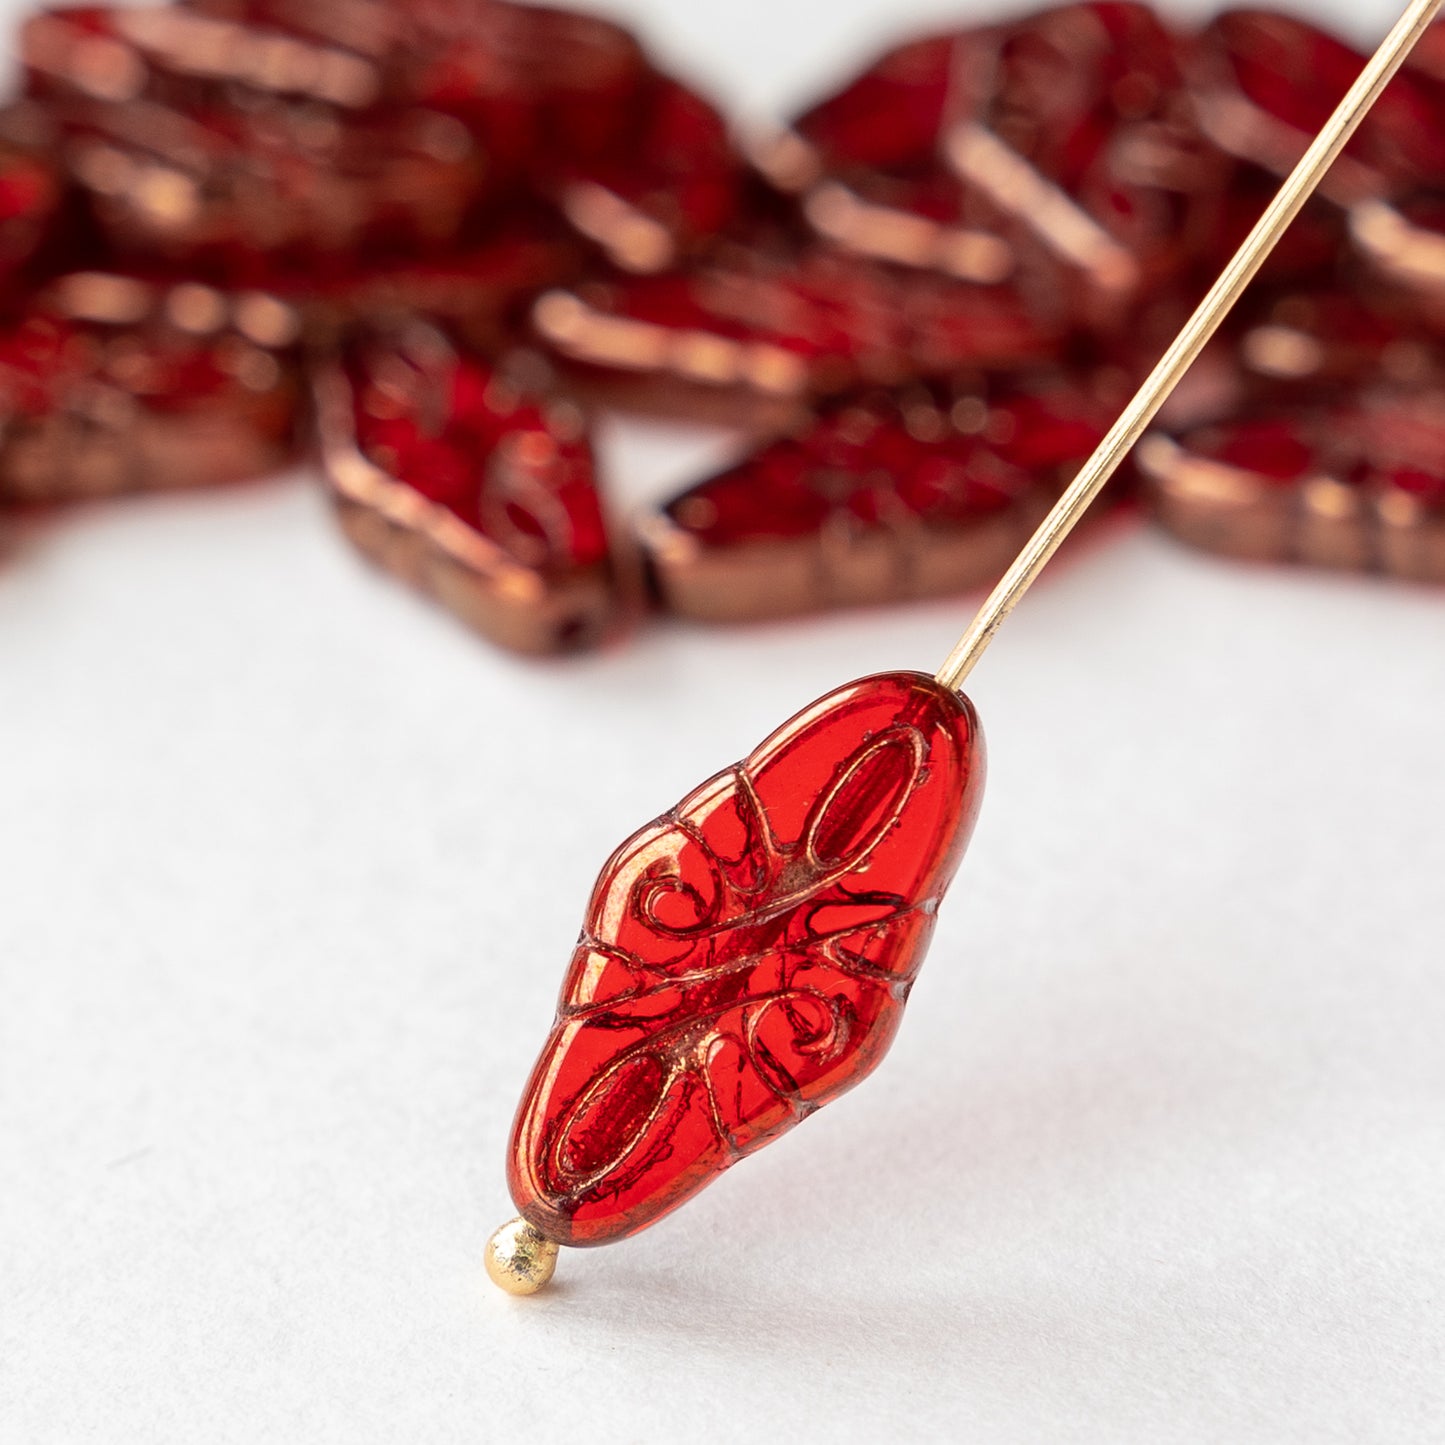 Load image into Gallery viewer, 9x19mm Arabesque Beads - Red with Bronze Wash - 10 or 30
